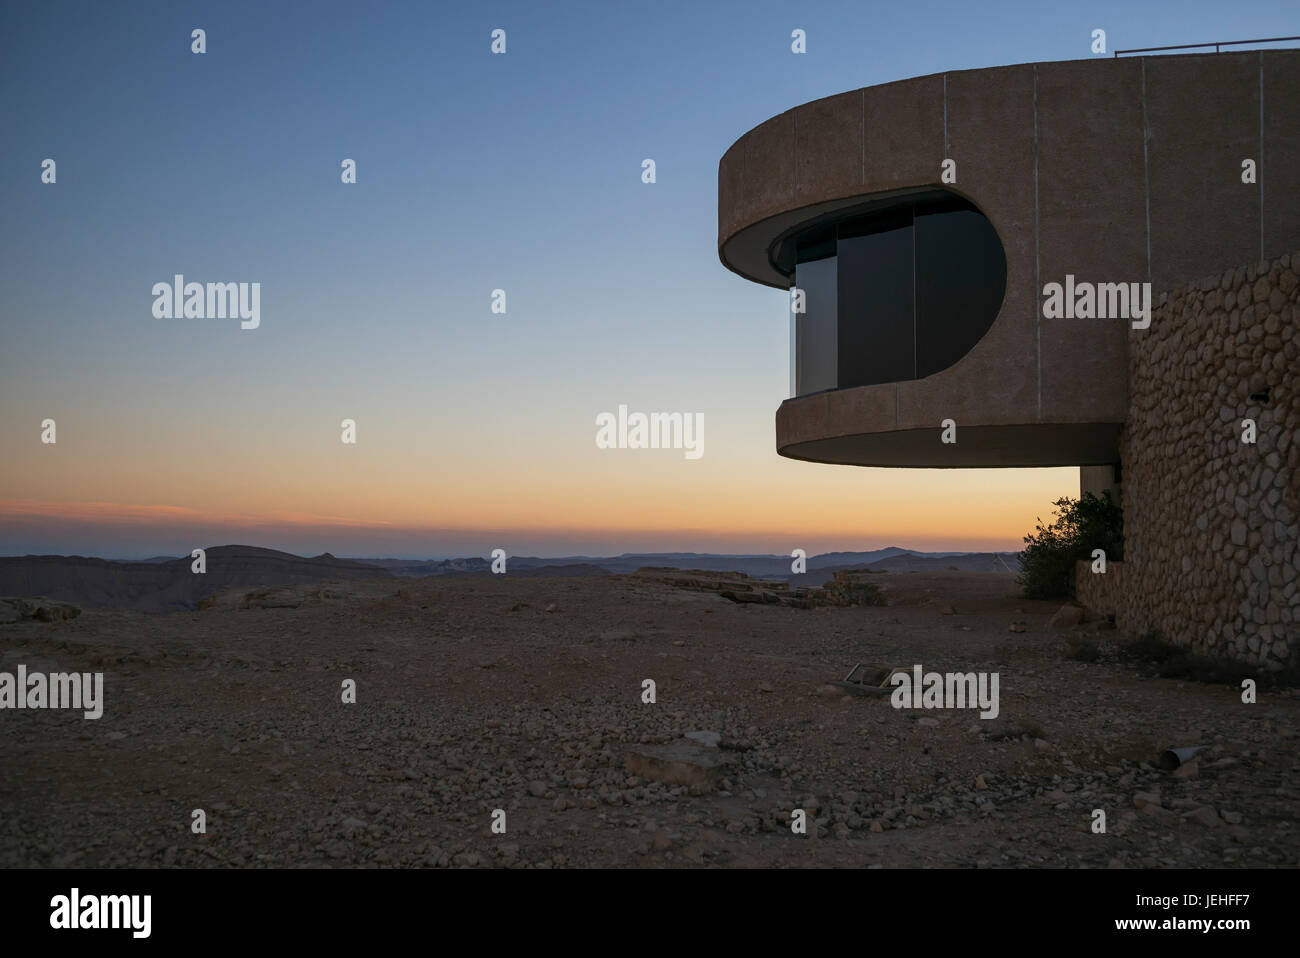 A colourful sunset over the horizon with a viewing window along a curved building for a view; Mitzpe Ramon, South District, Israel Stock Photo